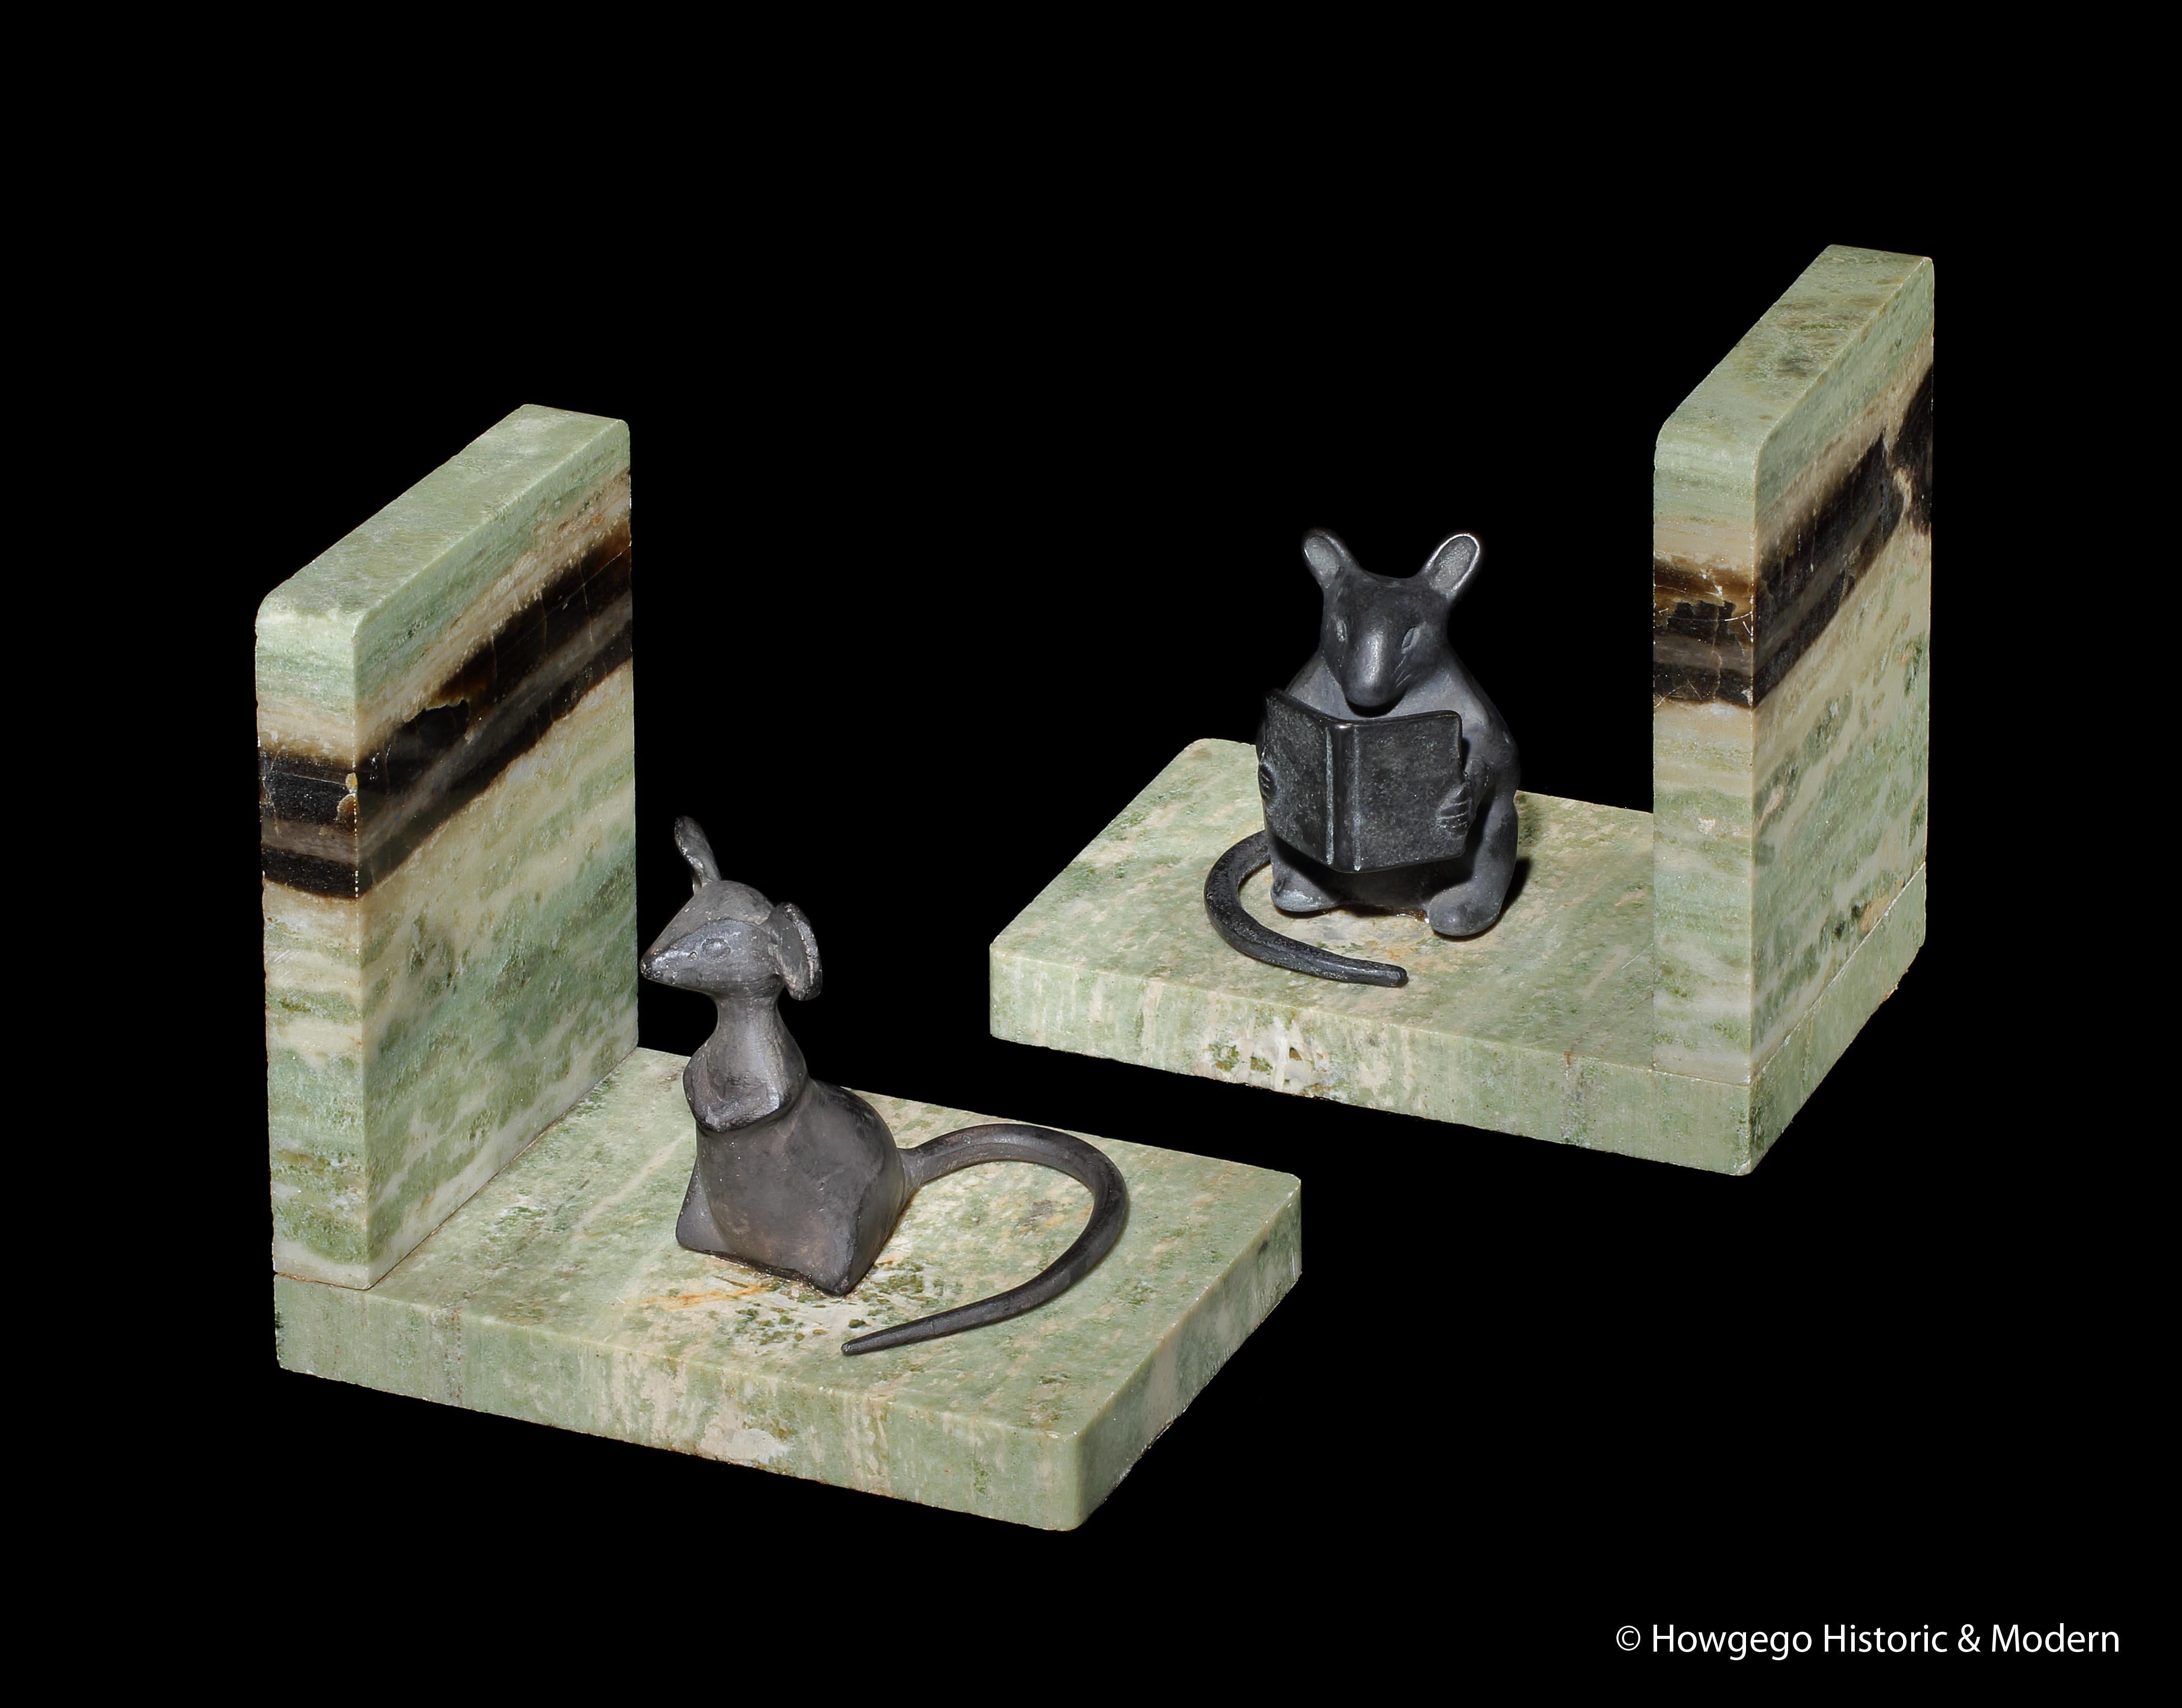 Unusual, fun, pair of art deco, marble and bronze, mouse, sculpture bookends.
One mouse is absorbed acquiring knowledge reading a book and the other is curiously looking towards the viewer or the outside world maybe he has acquired all the